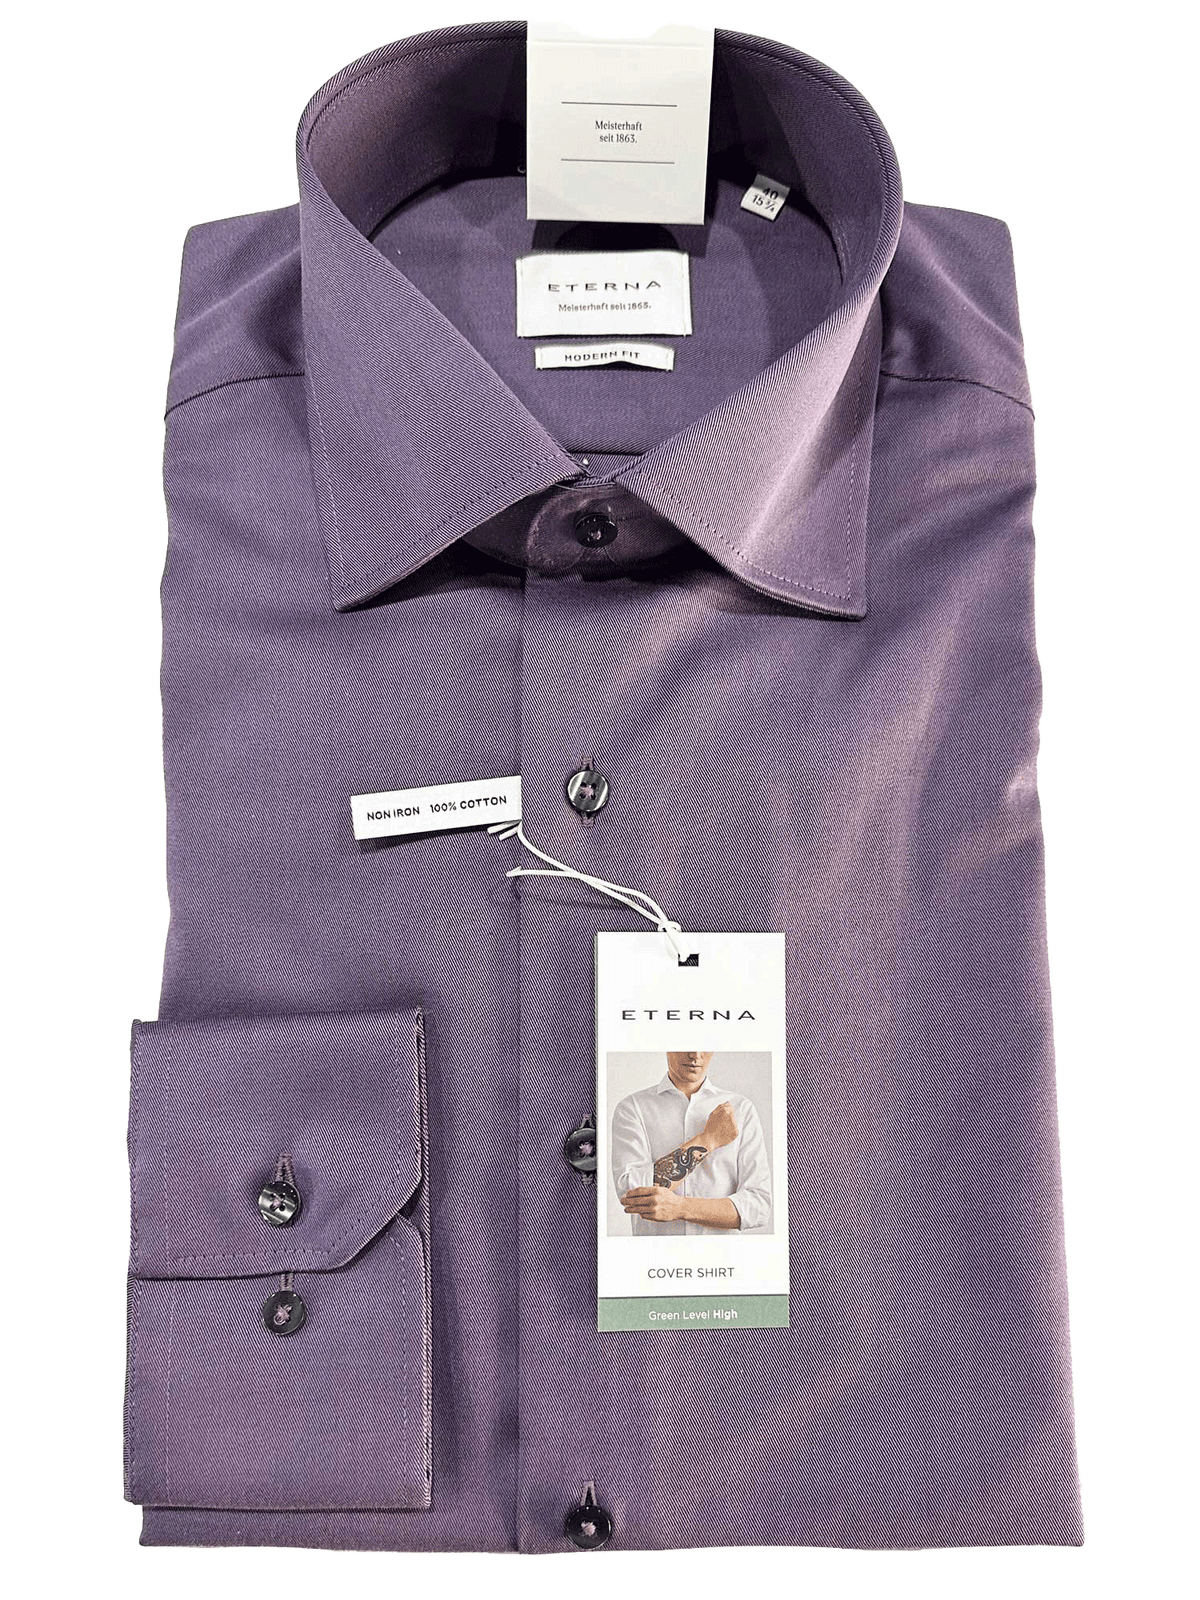 8816/98M  https://harrysformenswear.com.au/products/8816-98m  Eterna Shirts made with super fine cotton. ETERNA produces a wide range of high quality non-iron shirts and blouses. The extensive range includes: Comfort Fit , Modern Fit, Premium, Slim Fit and Super Slim Shirts. The ETERNA collection is based on 100 percent “ fine cotton”, a high-value and non-iron cotton. The fabric…